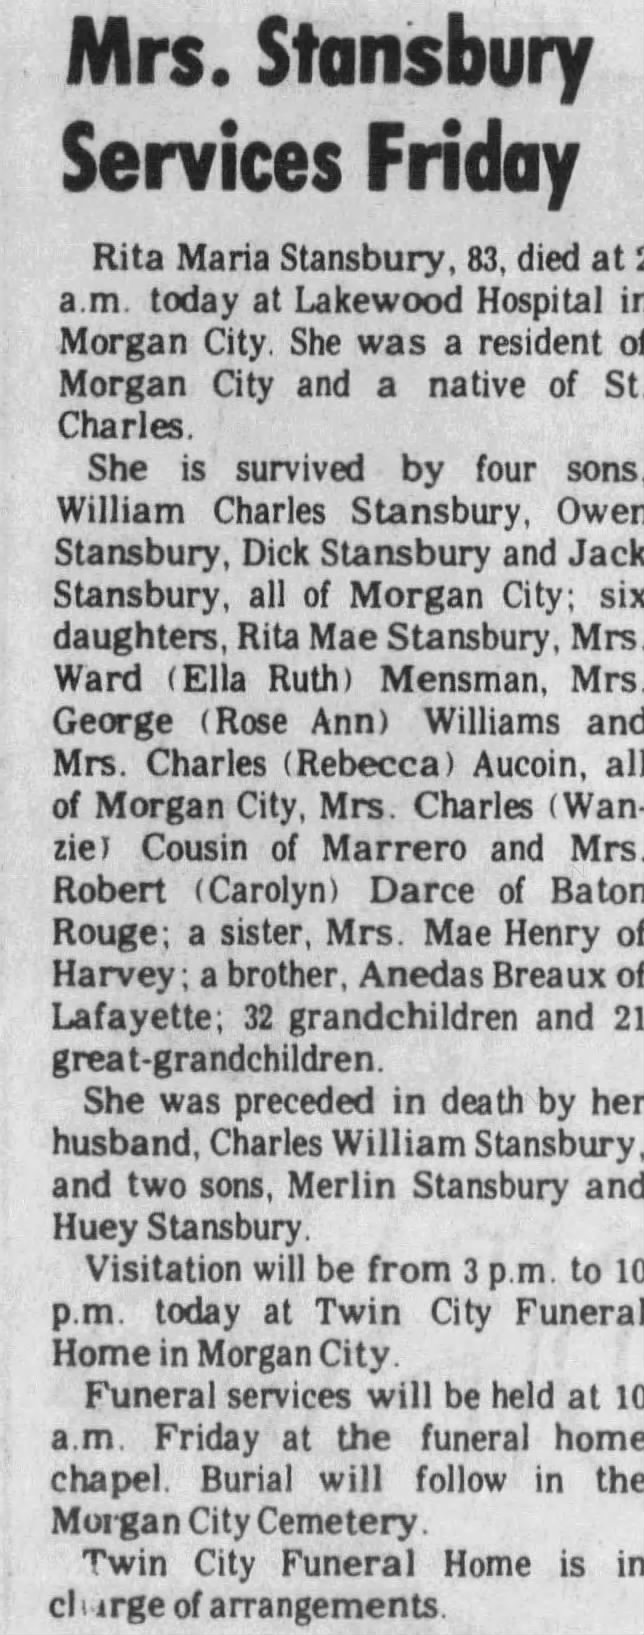 Obituary for Rita Breaux Stansbury,
Daily Review, Morgan City, 1984.